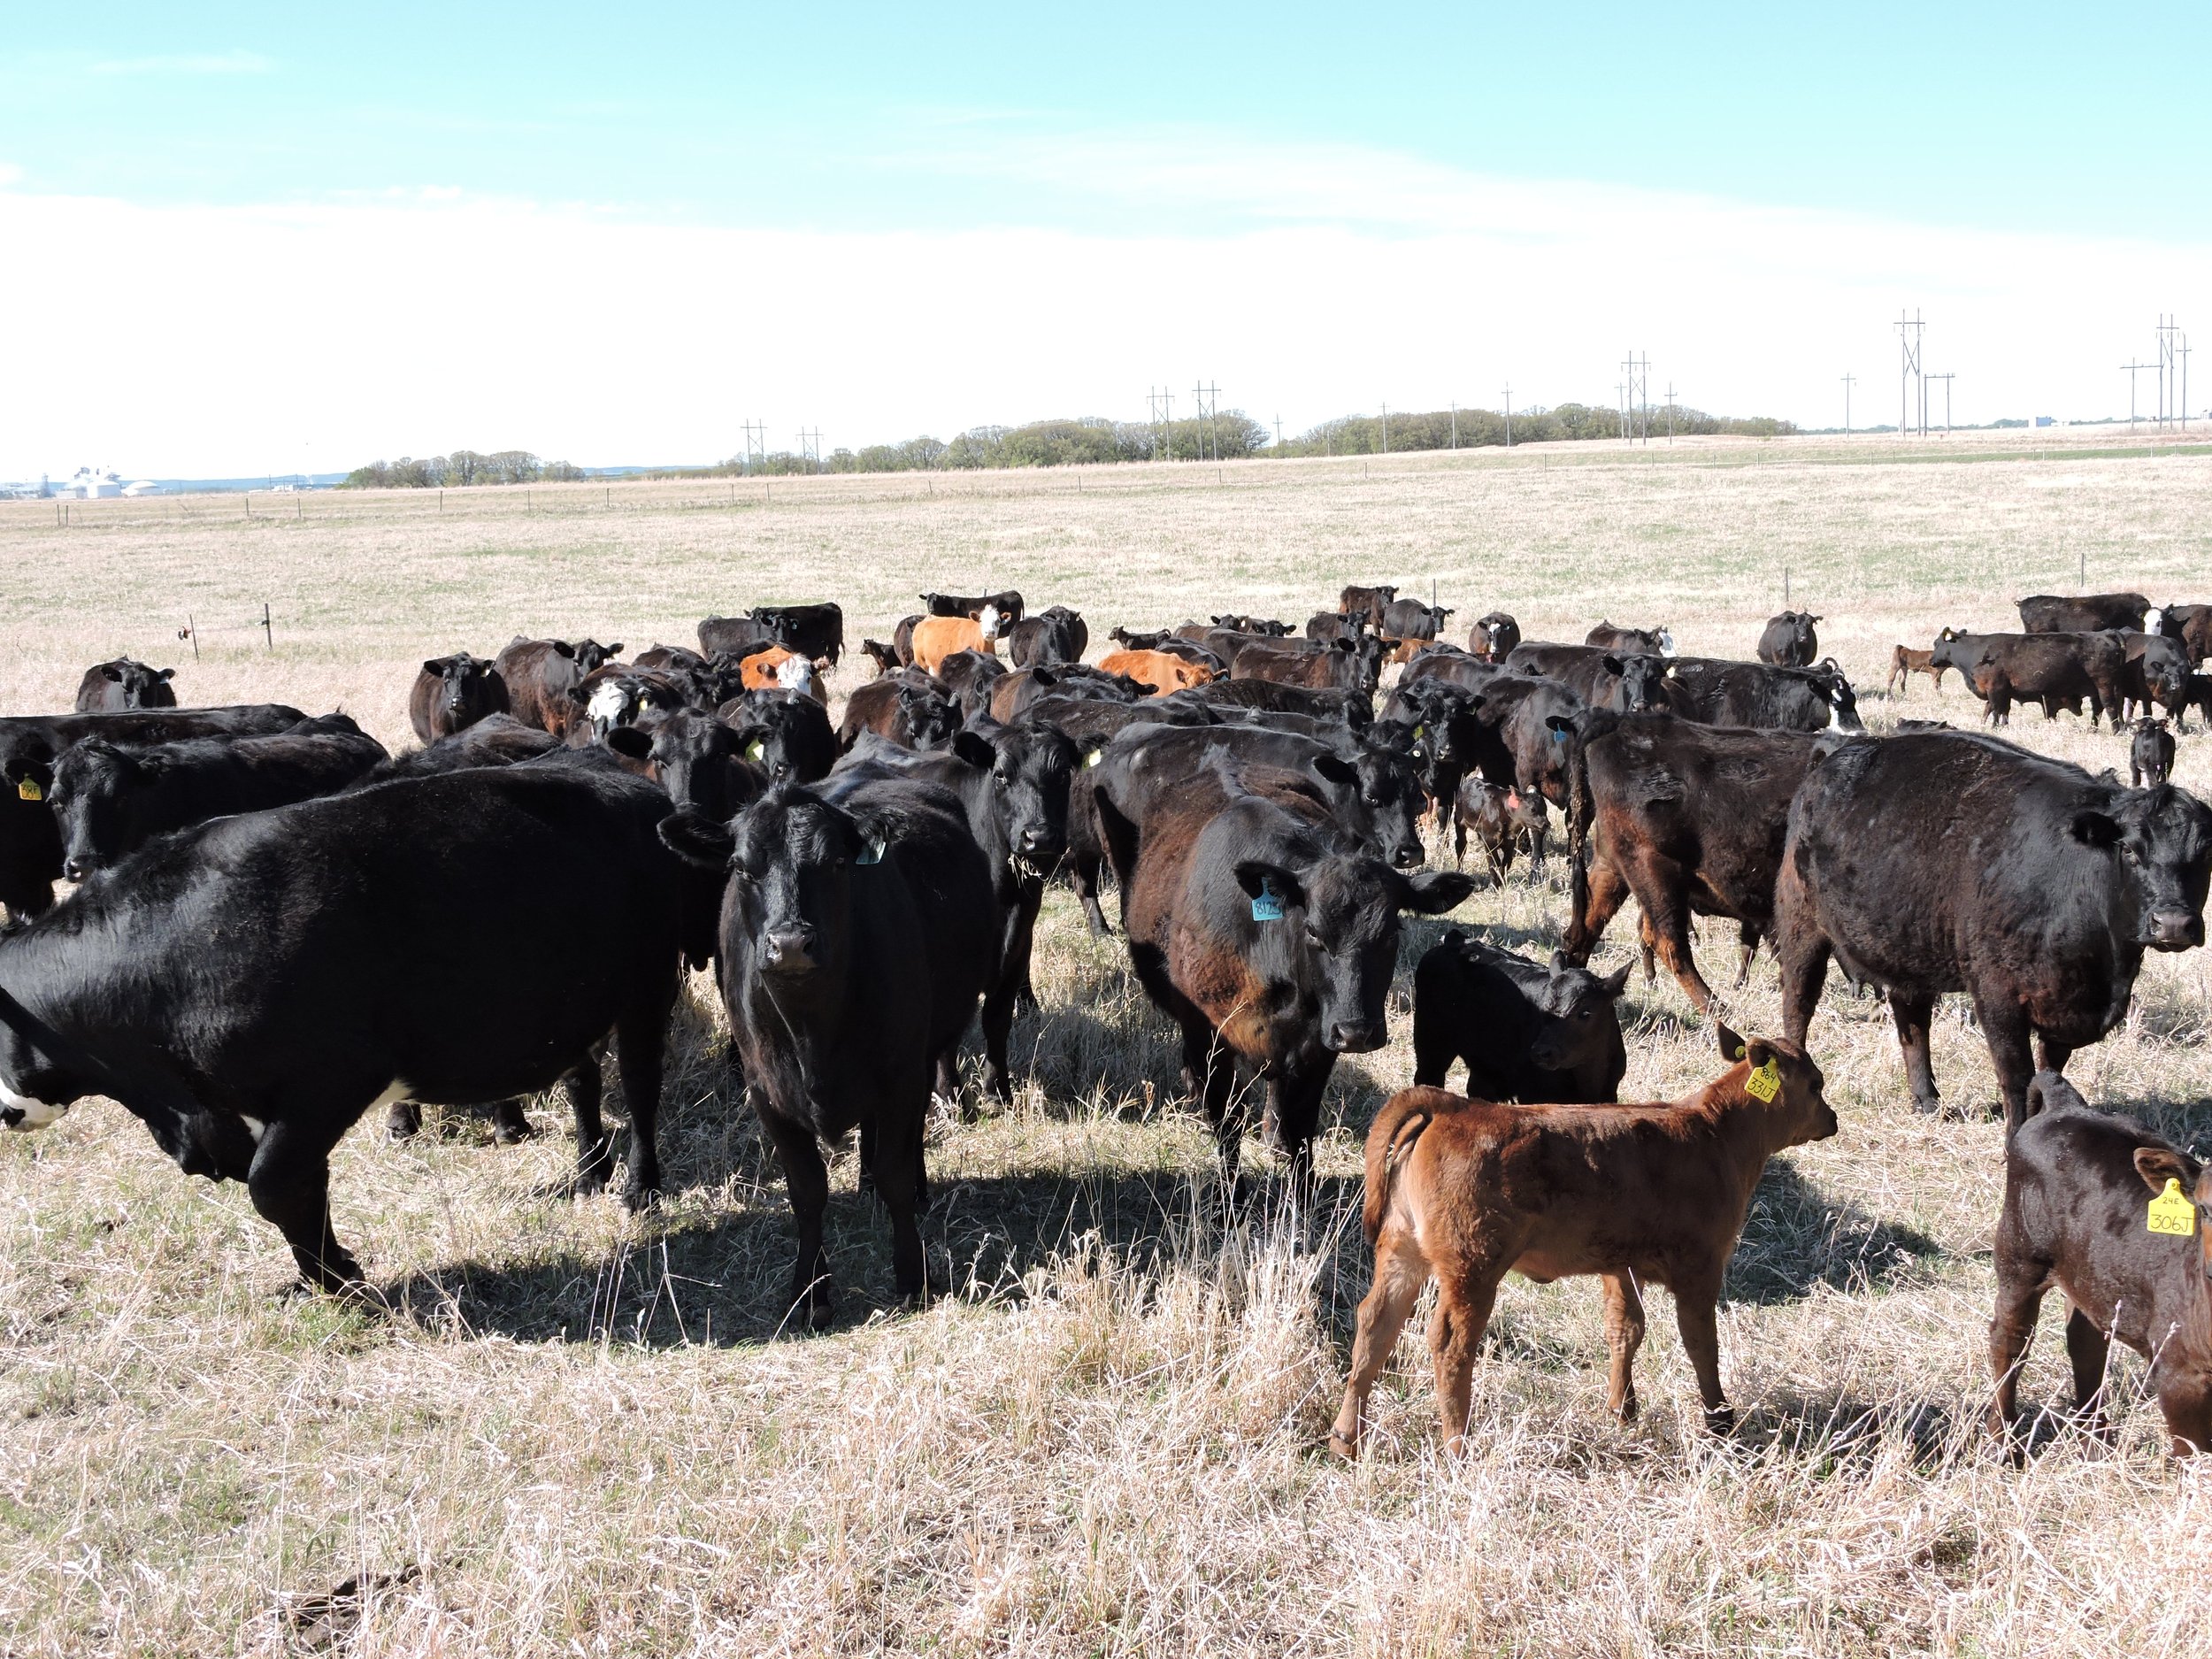 Early season grazing reduces old biomass and suppresses grass competition